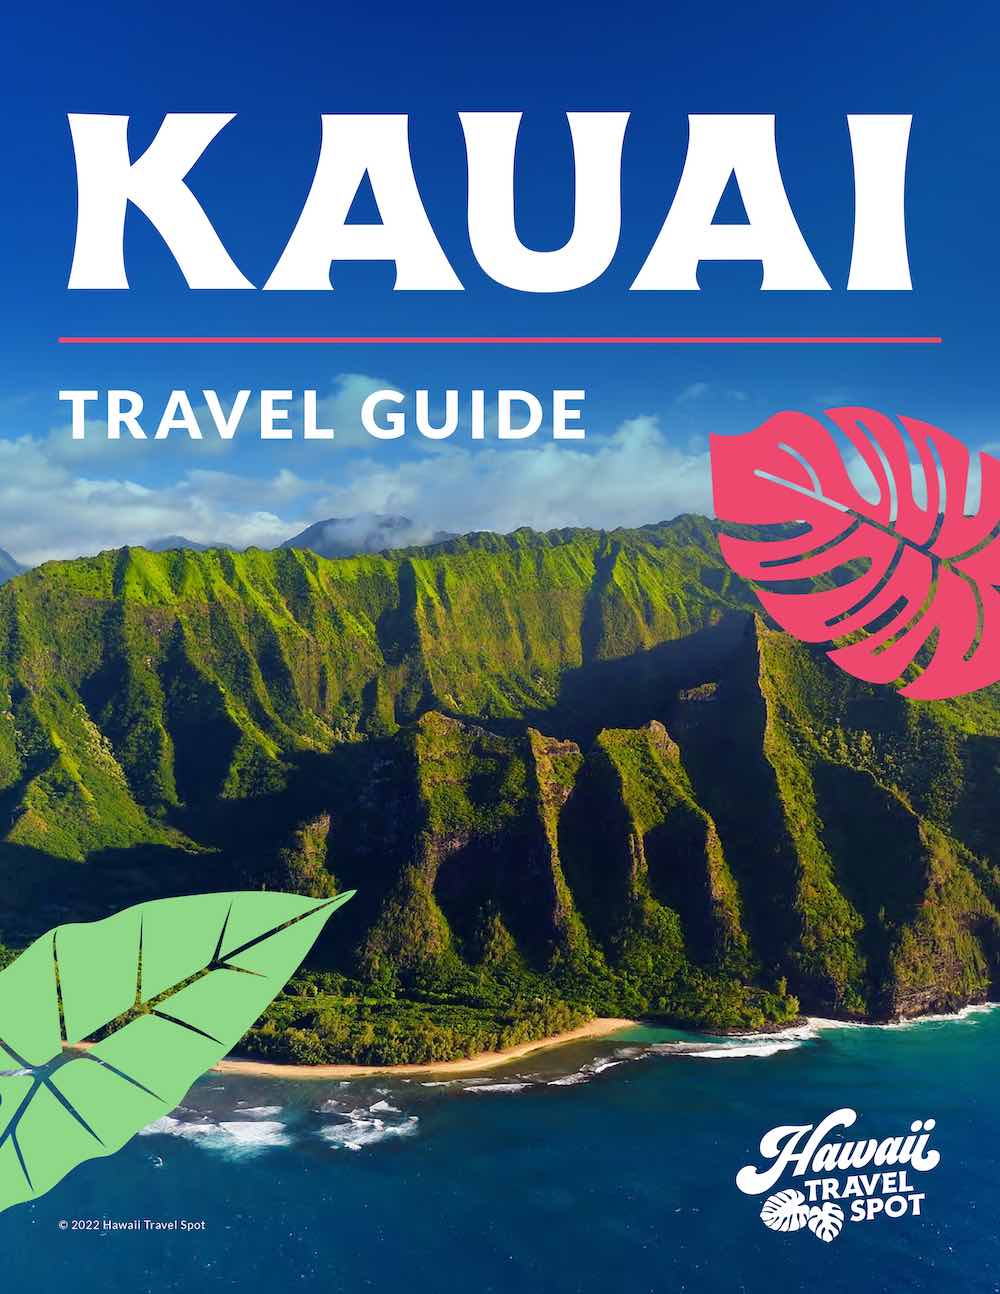 Check out this Kauai Travel Guide from top Hawaii blog Hawaii Travel Spot!